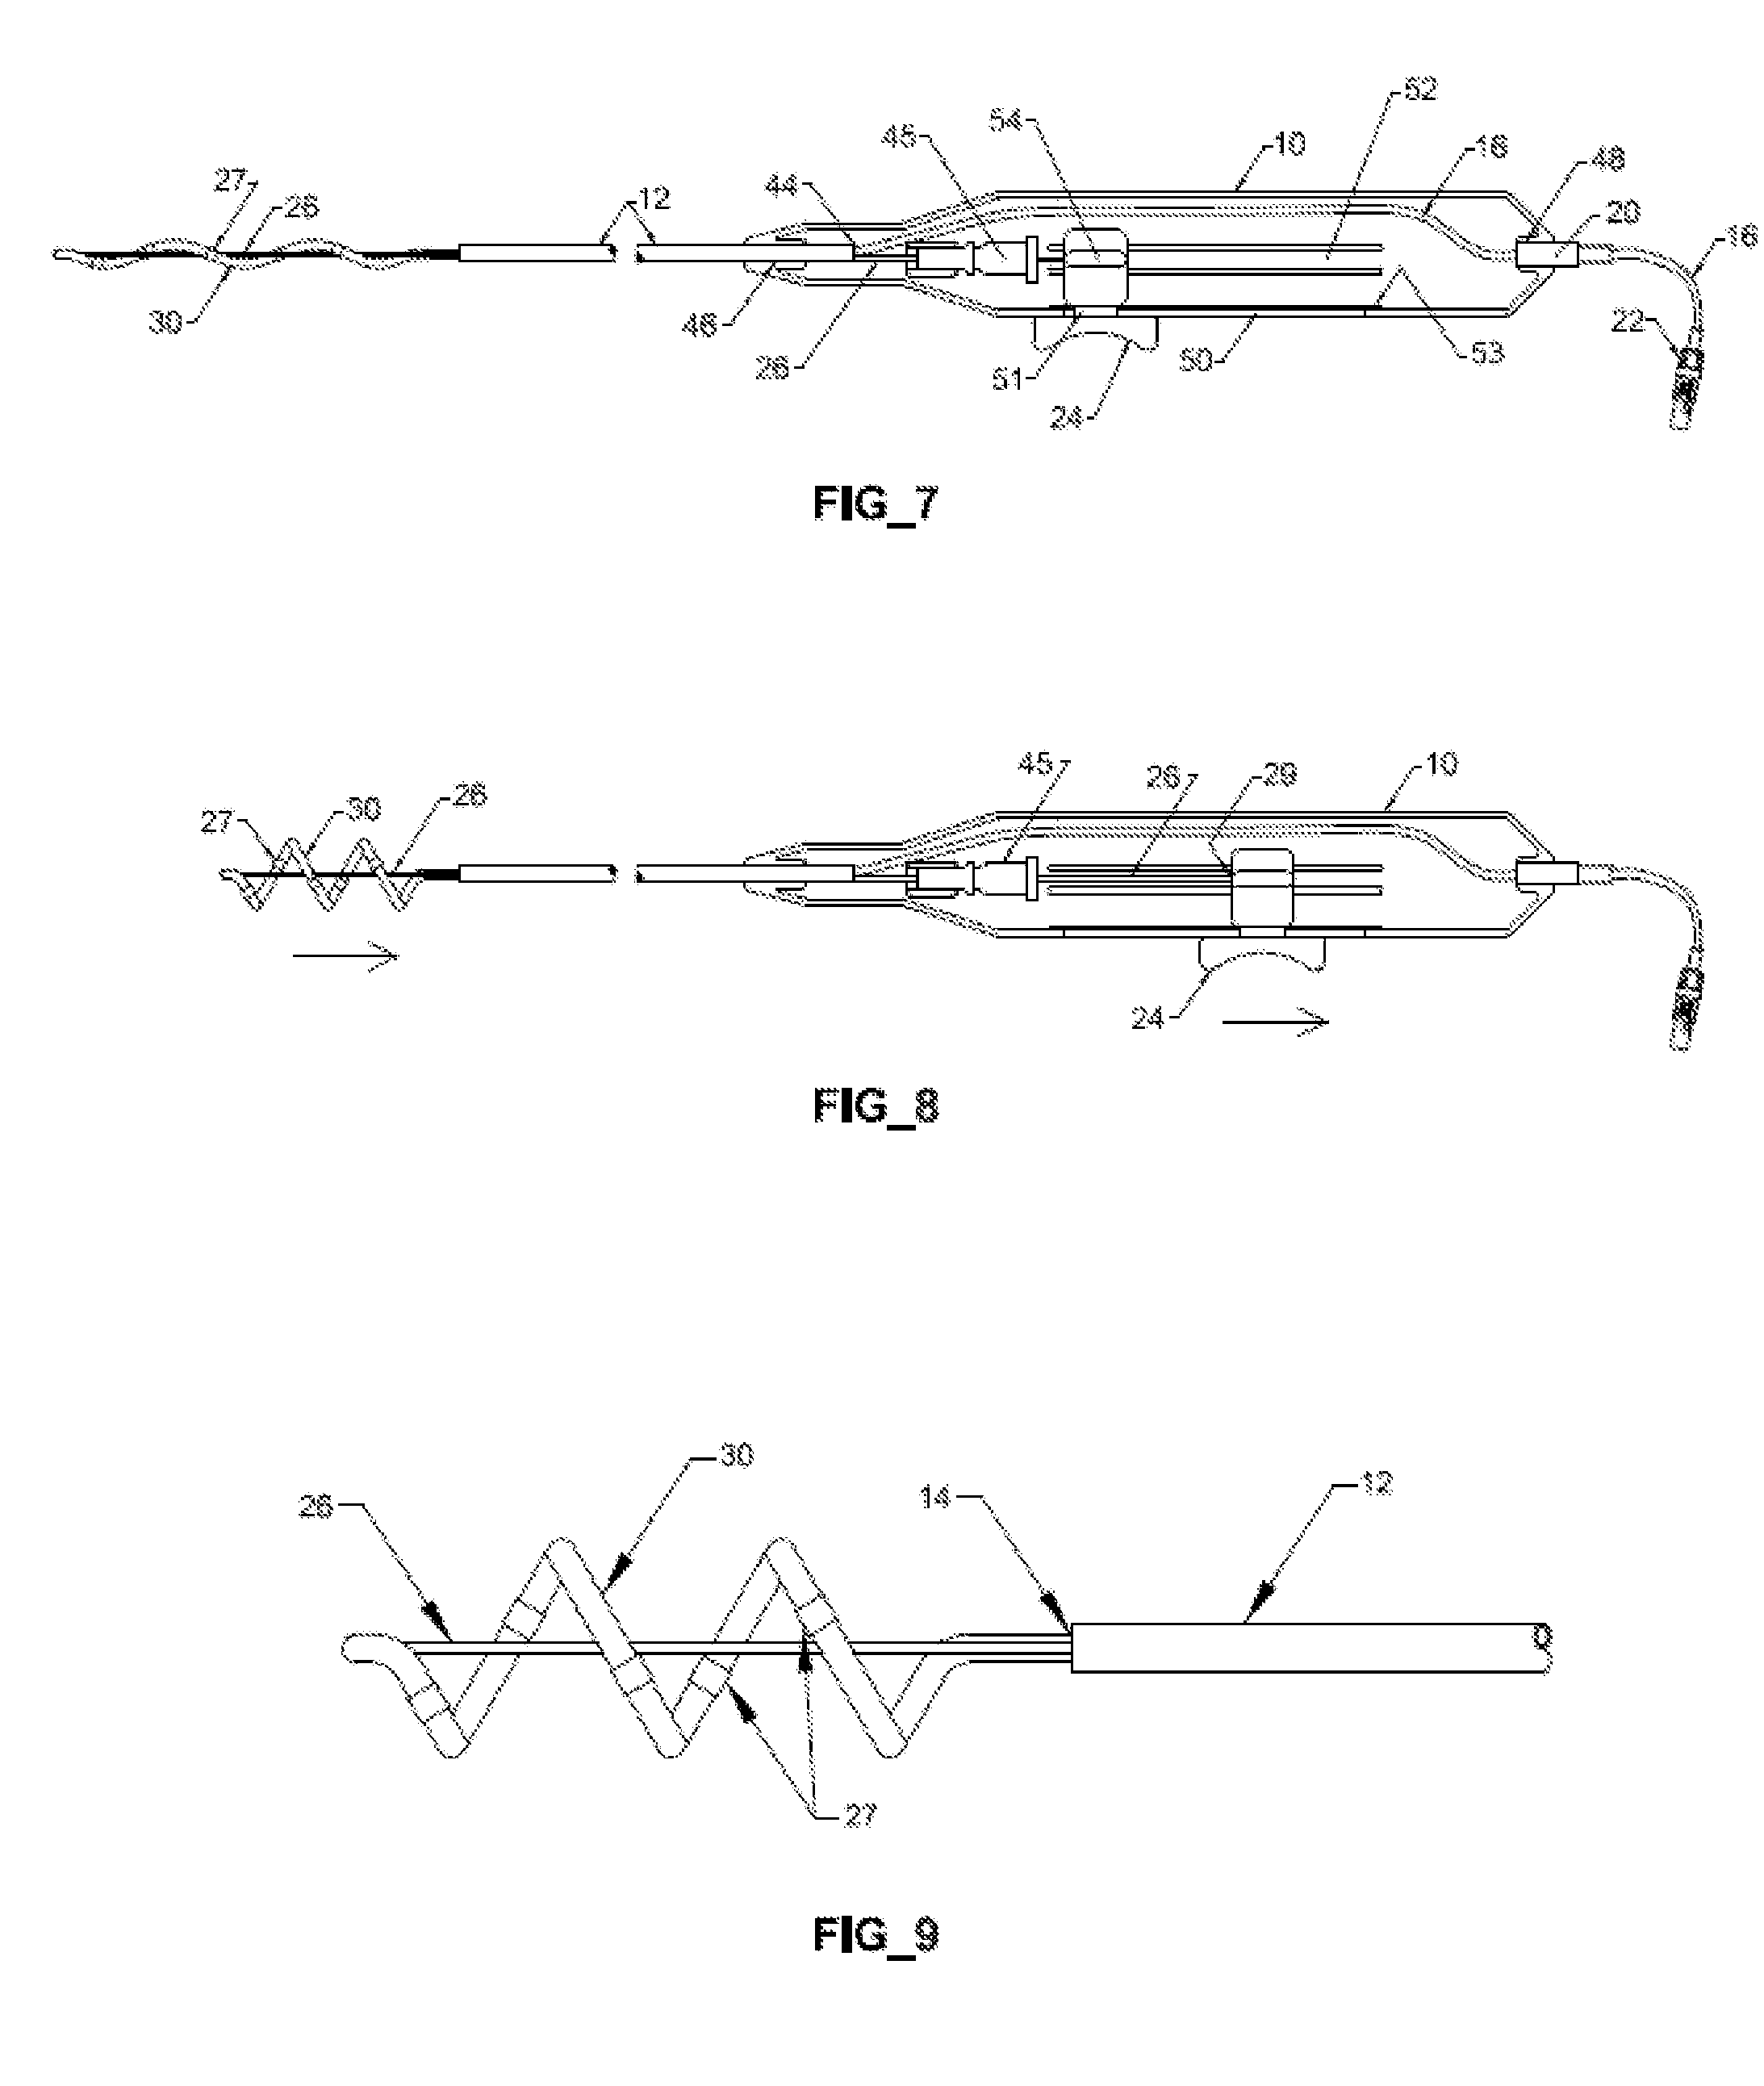 Helical DeNervation Ablation Catheter Apparatus